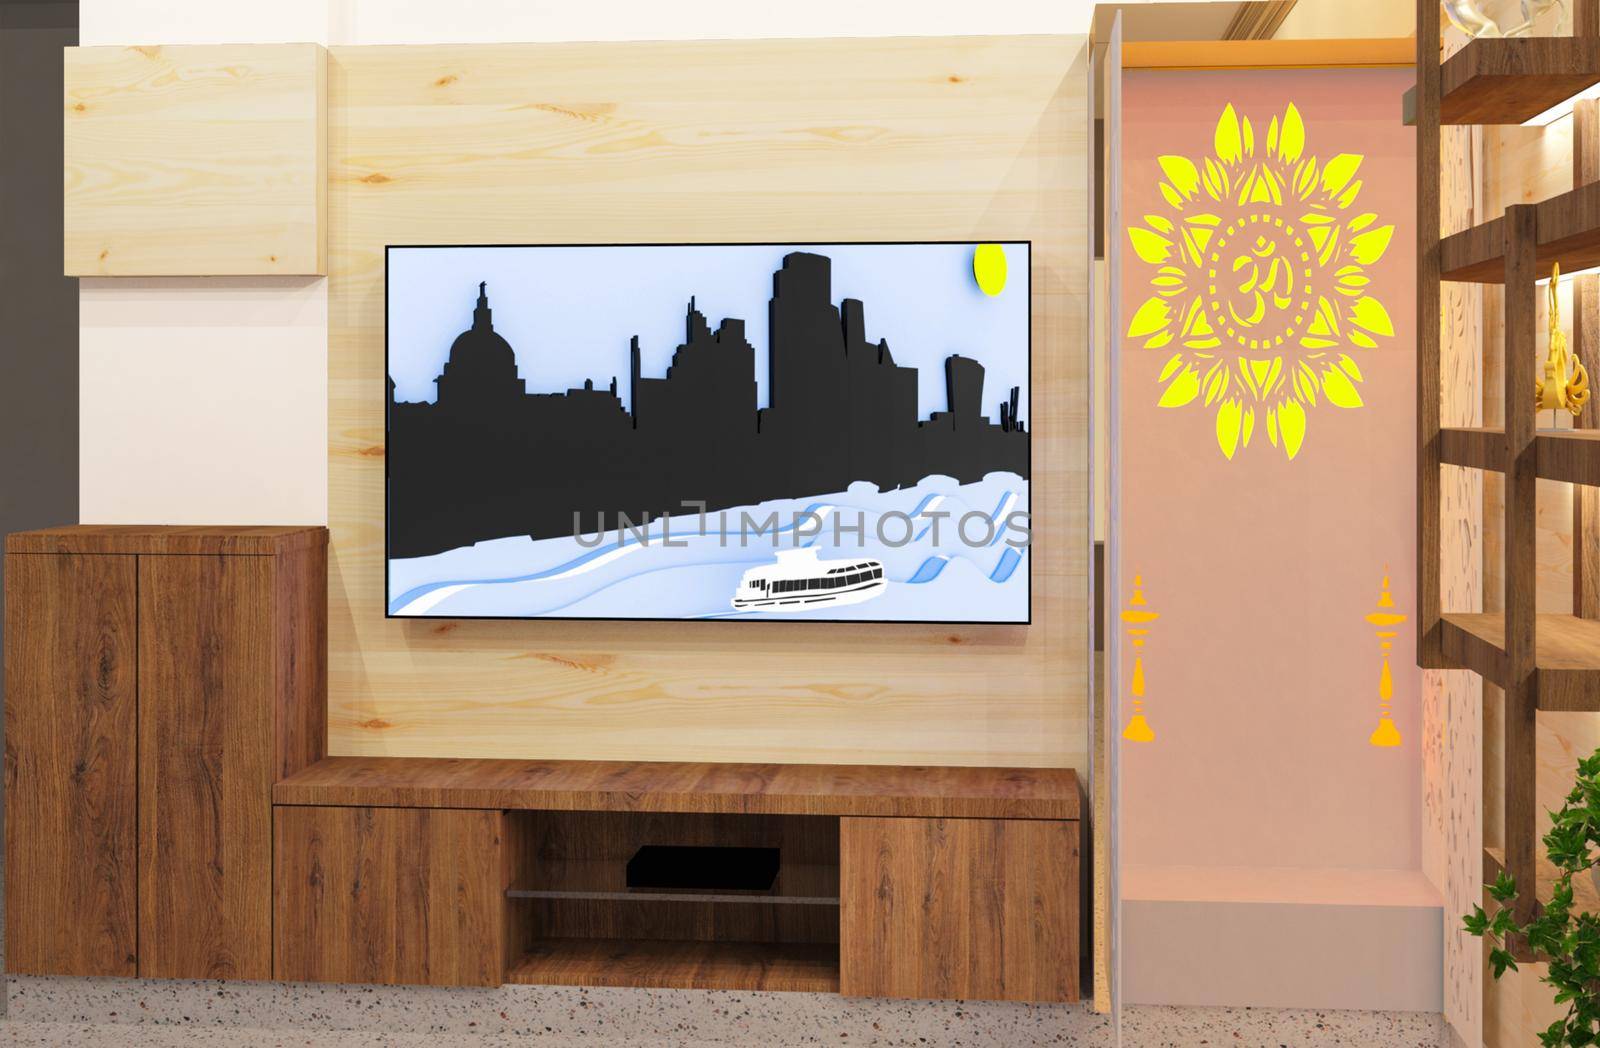 3d rendered pine wood wall decoration with walnut wood cove light shelve and tv unit.